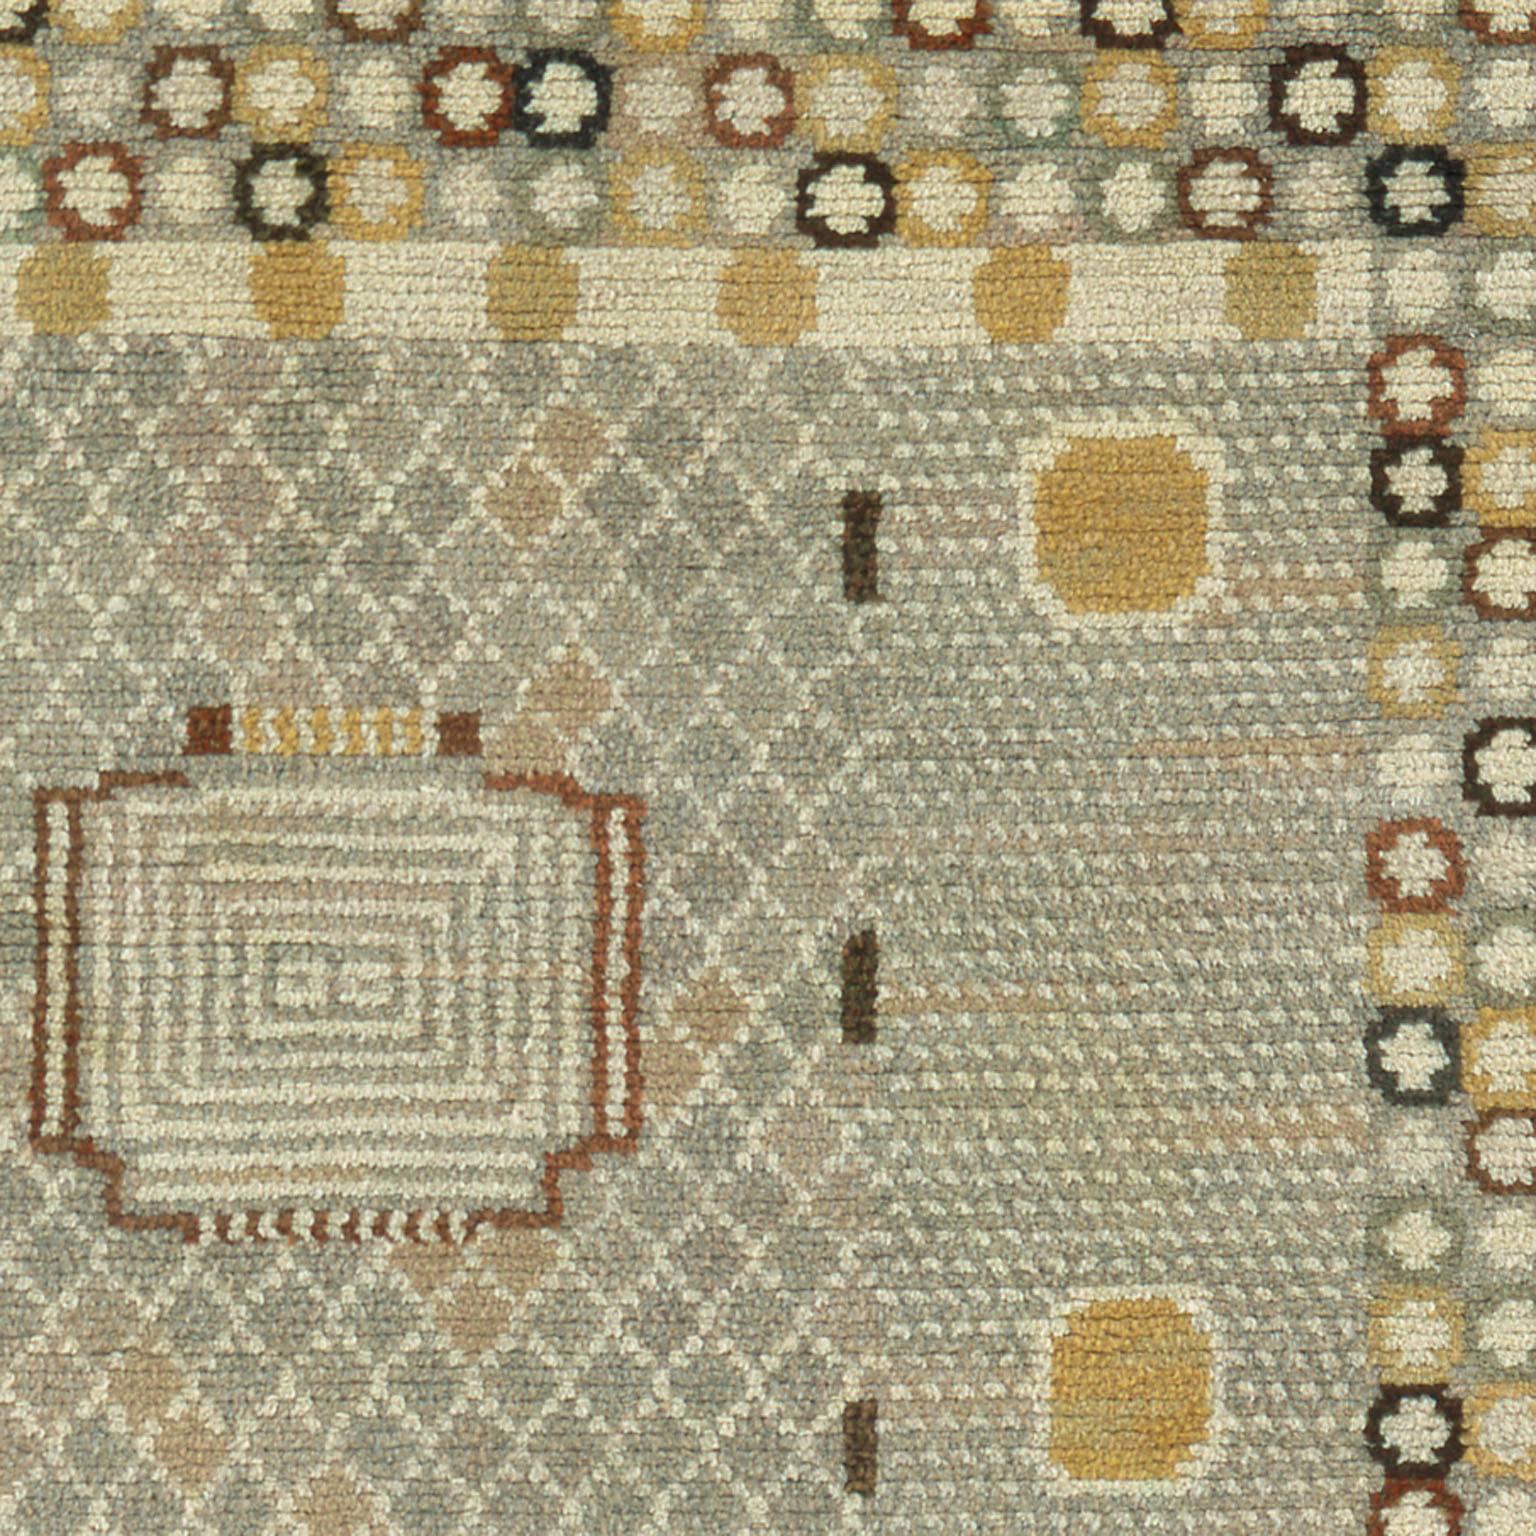 Hand-Knotted Mid-20th Century Swedish Pile Carpet by AB Märta Måås-Fjetterström  For Sale